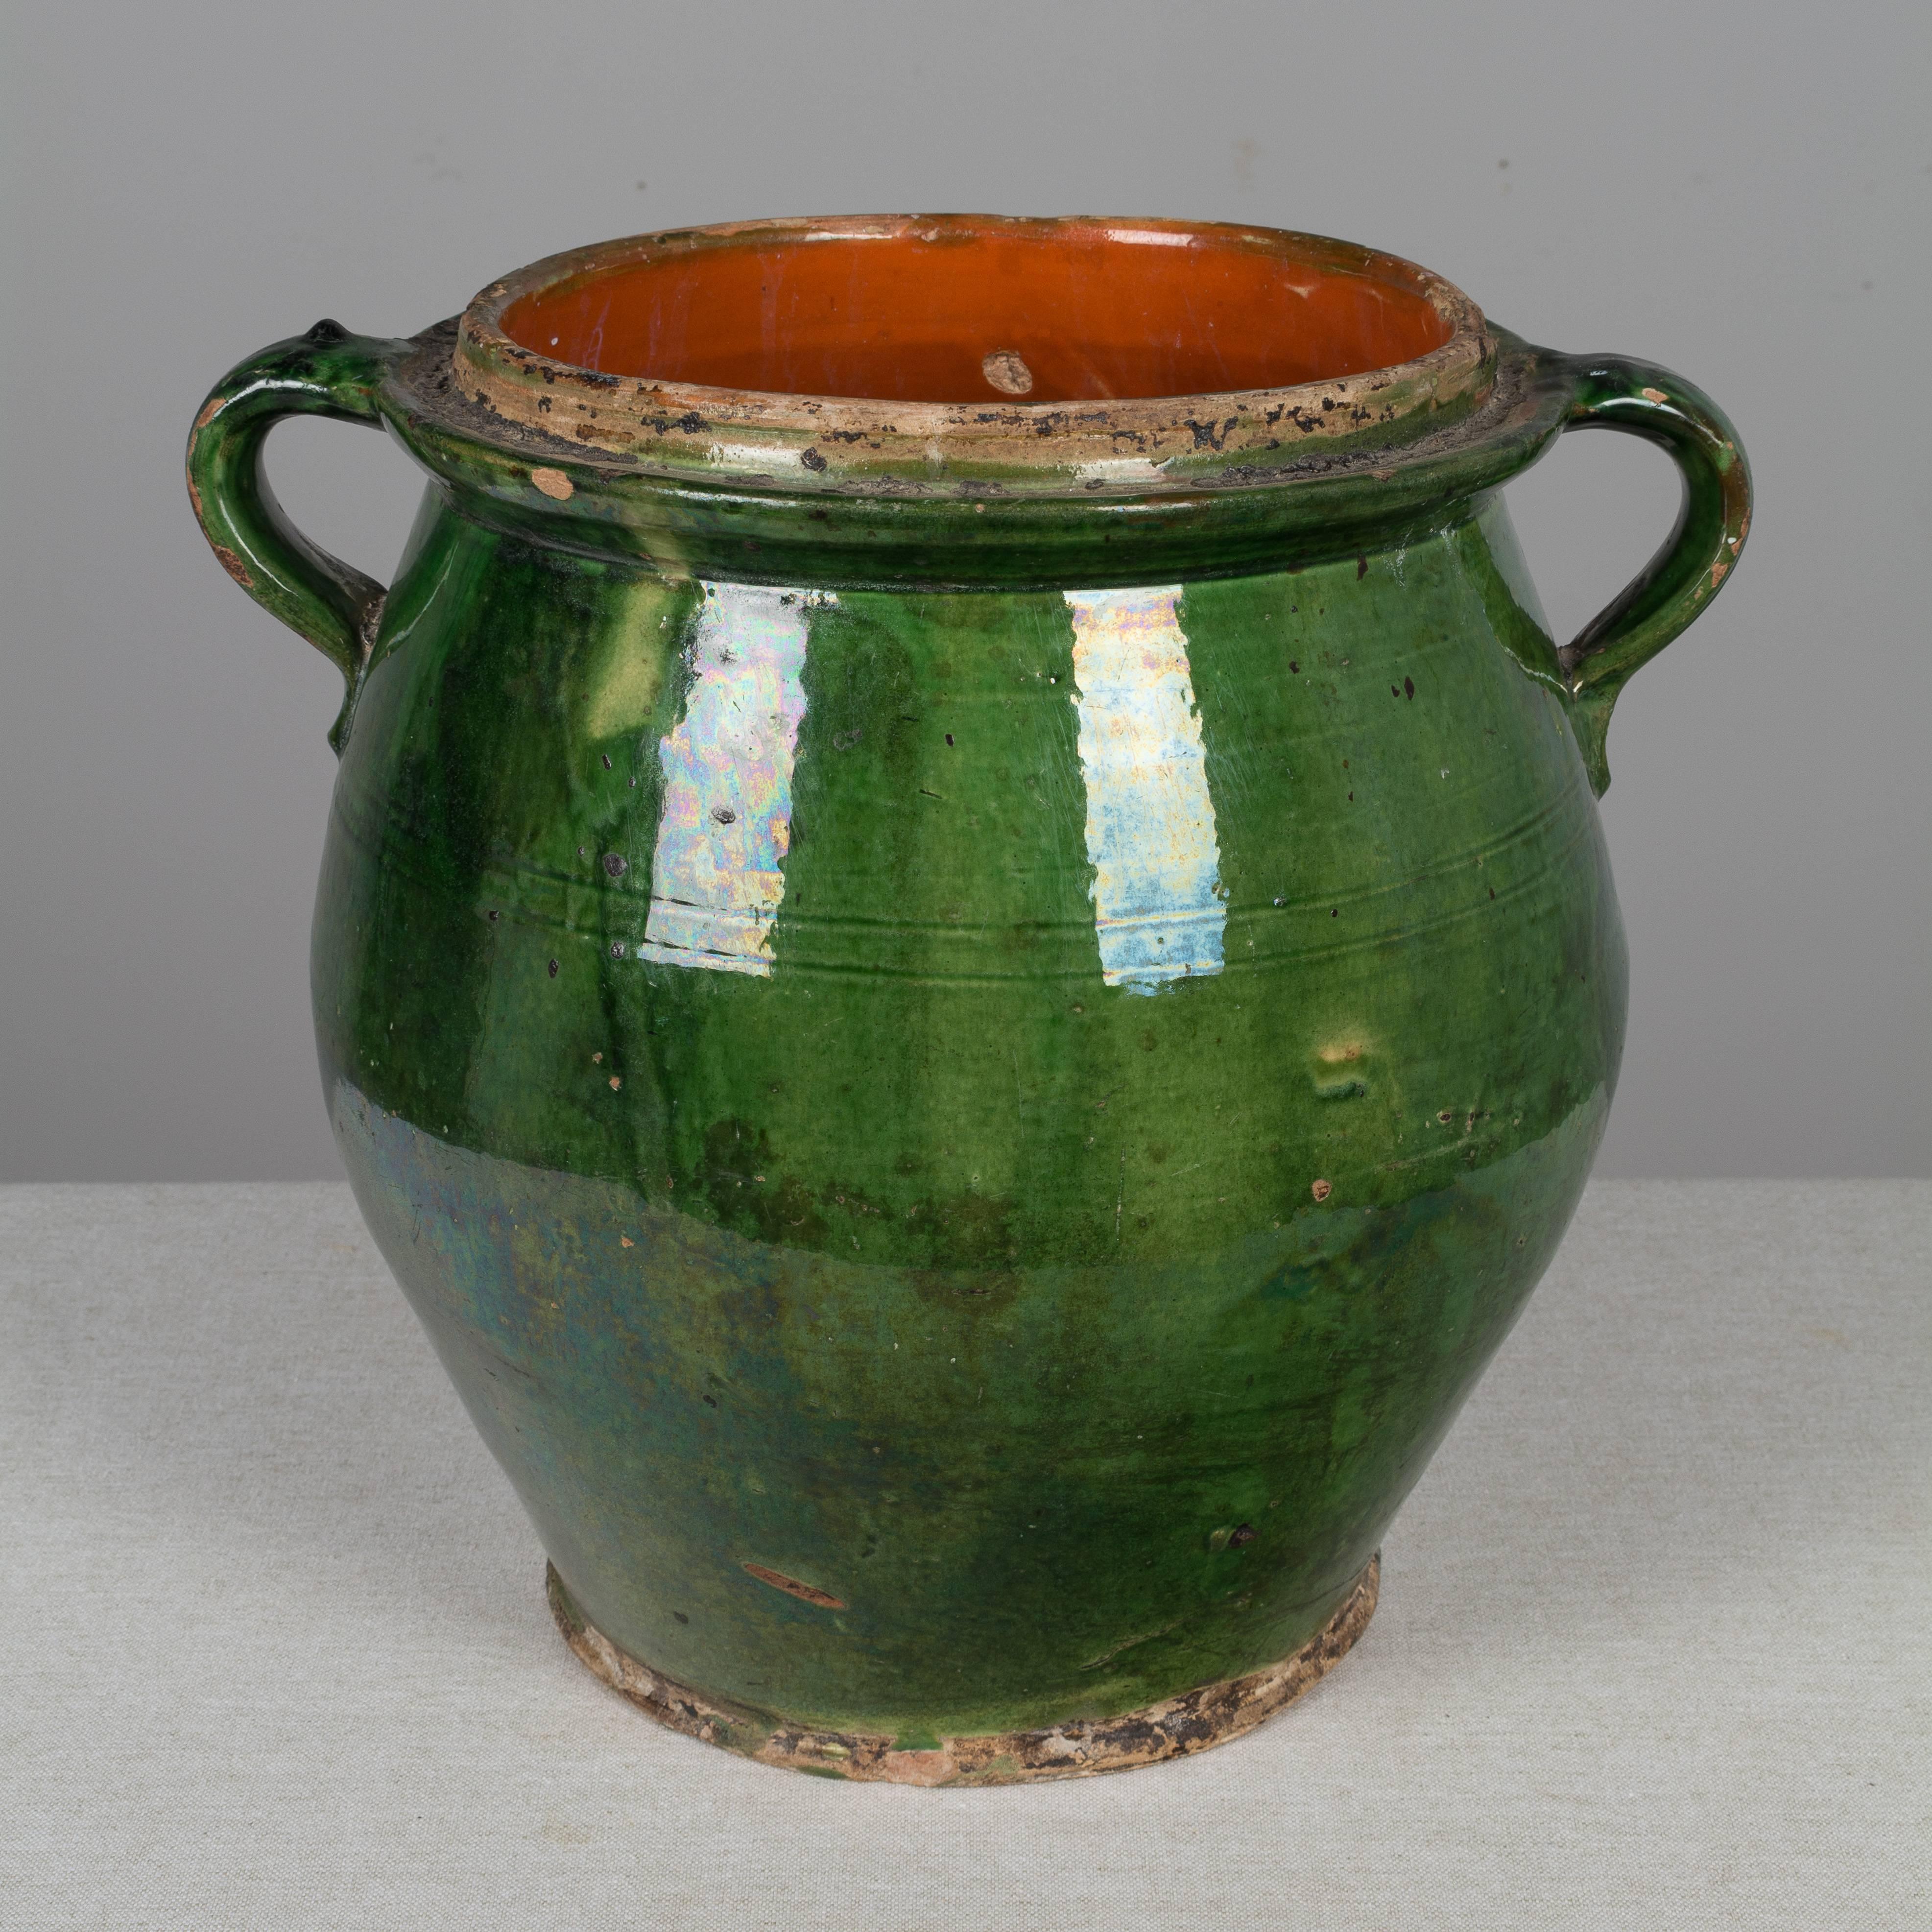 A large 19th century French terracotta two-handled pot with a beautiful emerald green glazed exterior and a rich terracotta glazed interior. In very good condition with a few chips. Weight: 11 lbs. Please refer to photos for more details. We have a